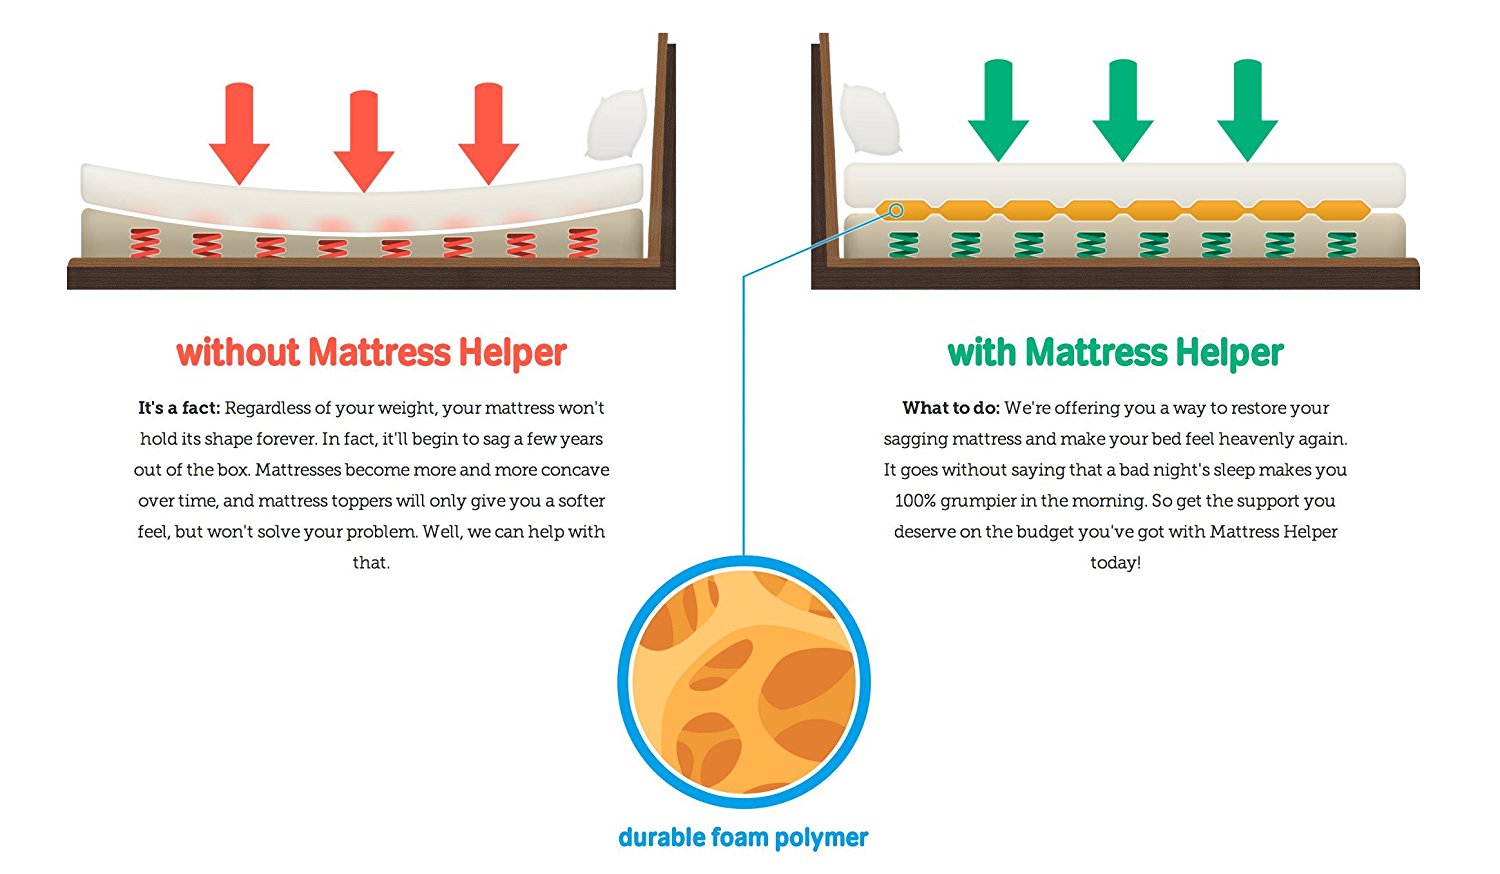 a graphic comparing a mattress with and without Mattress Helper